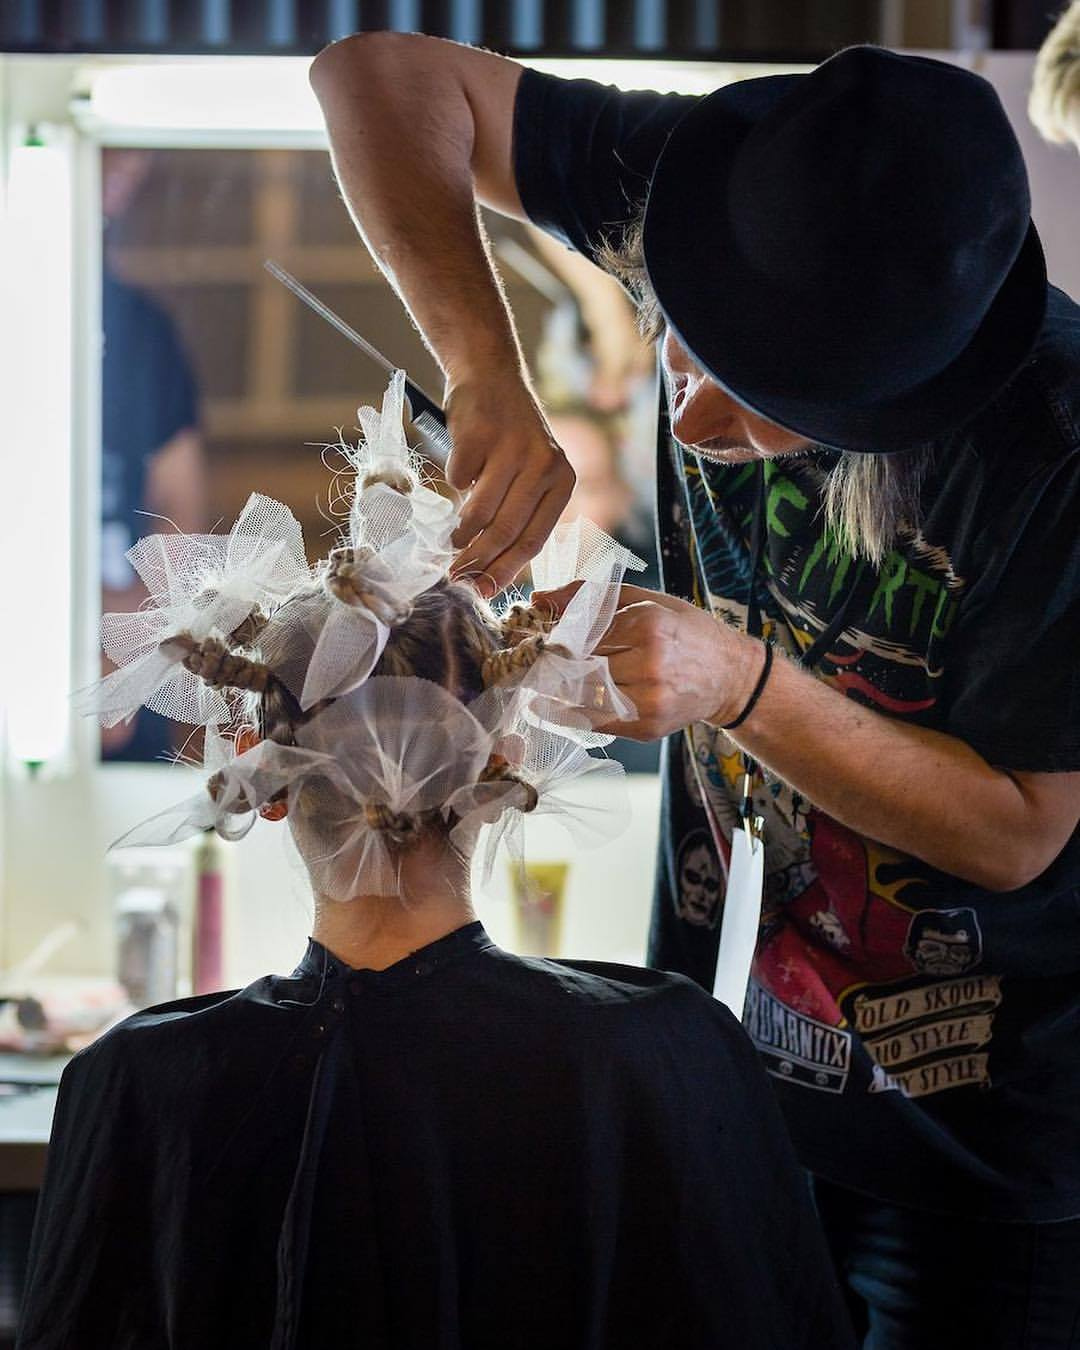 A hairdresser is working on customer to create a beautiful hair design with ribbons.